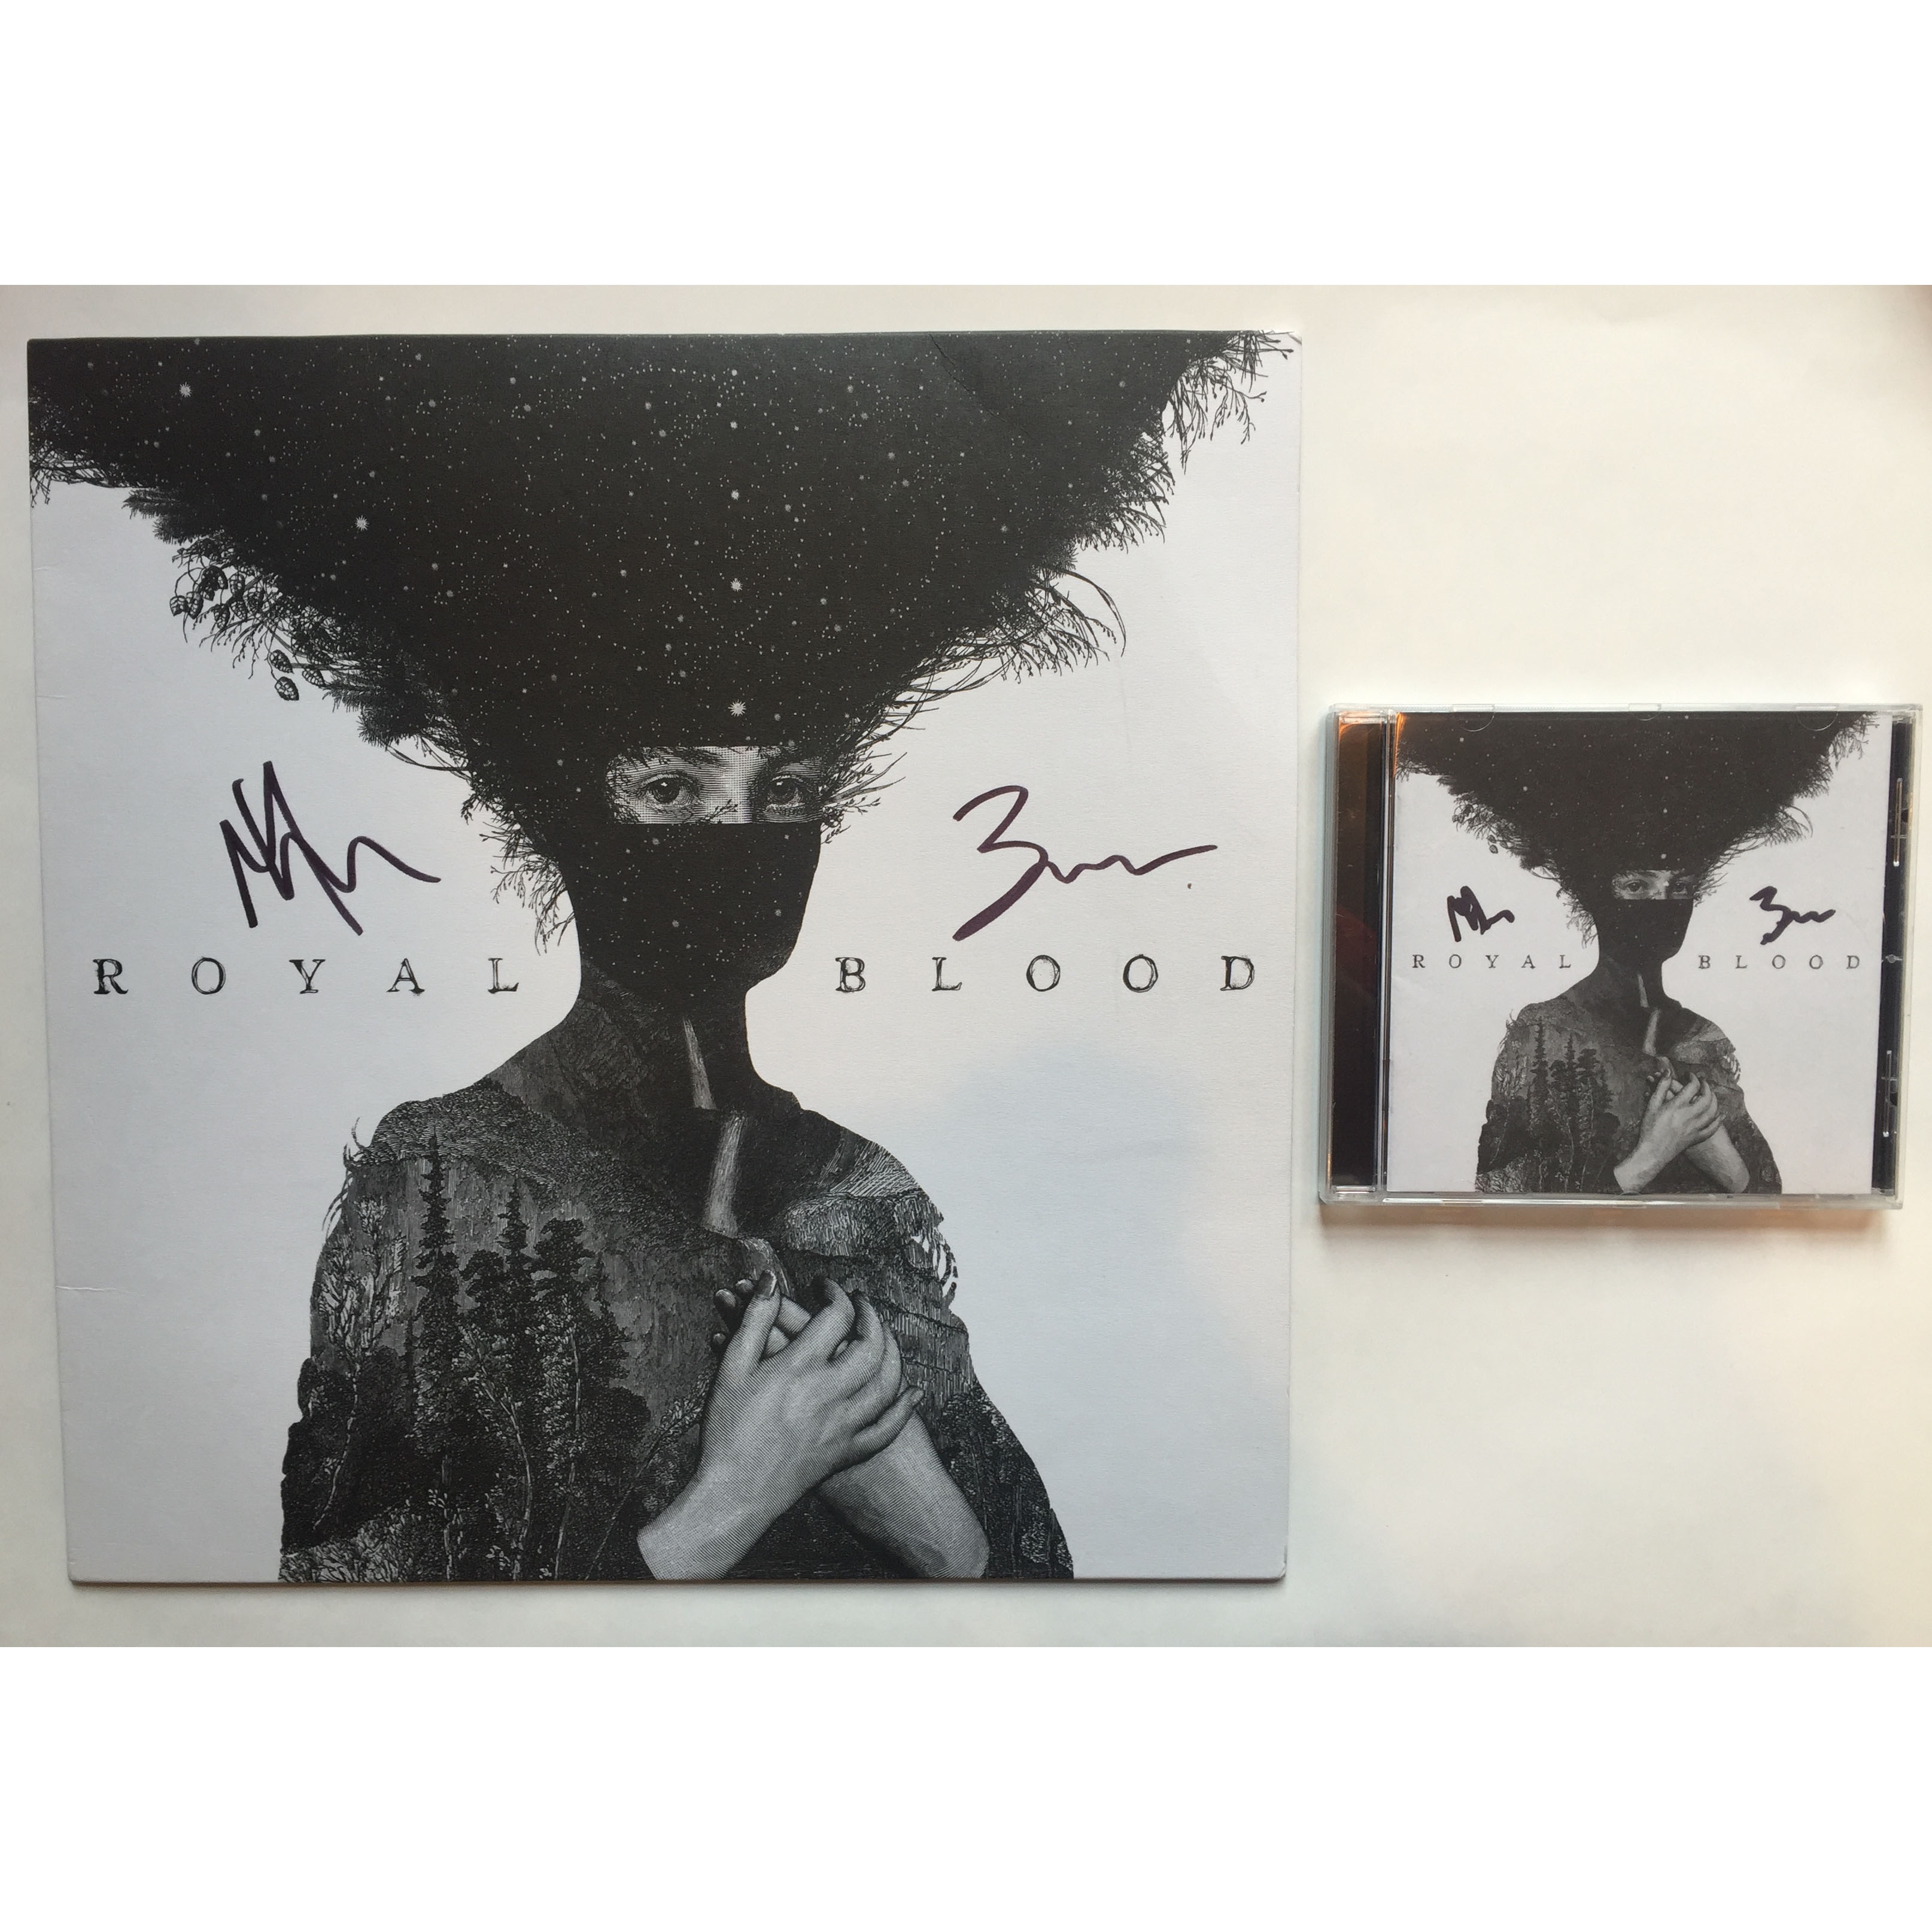 Signed Royal Blood Vinyl and